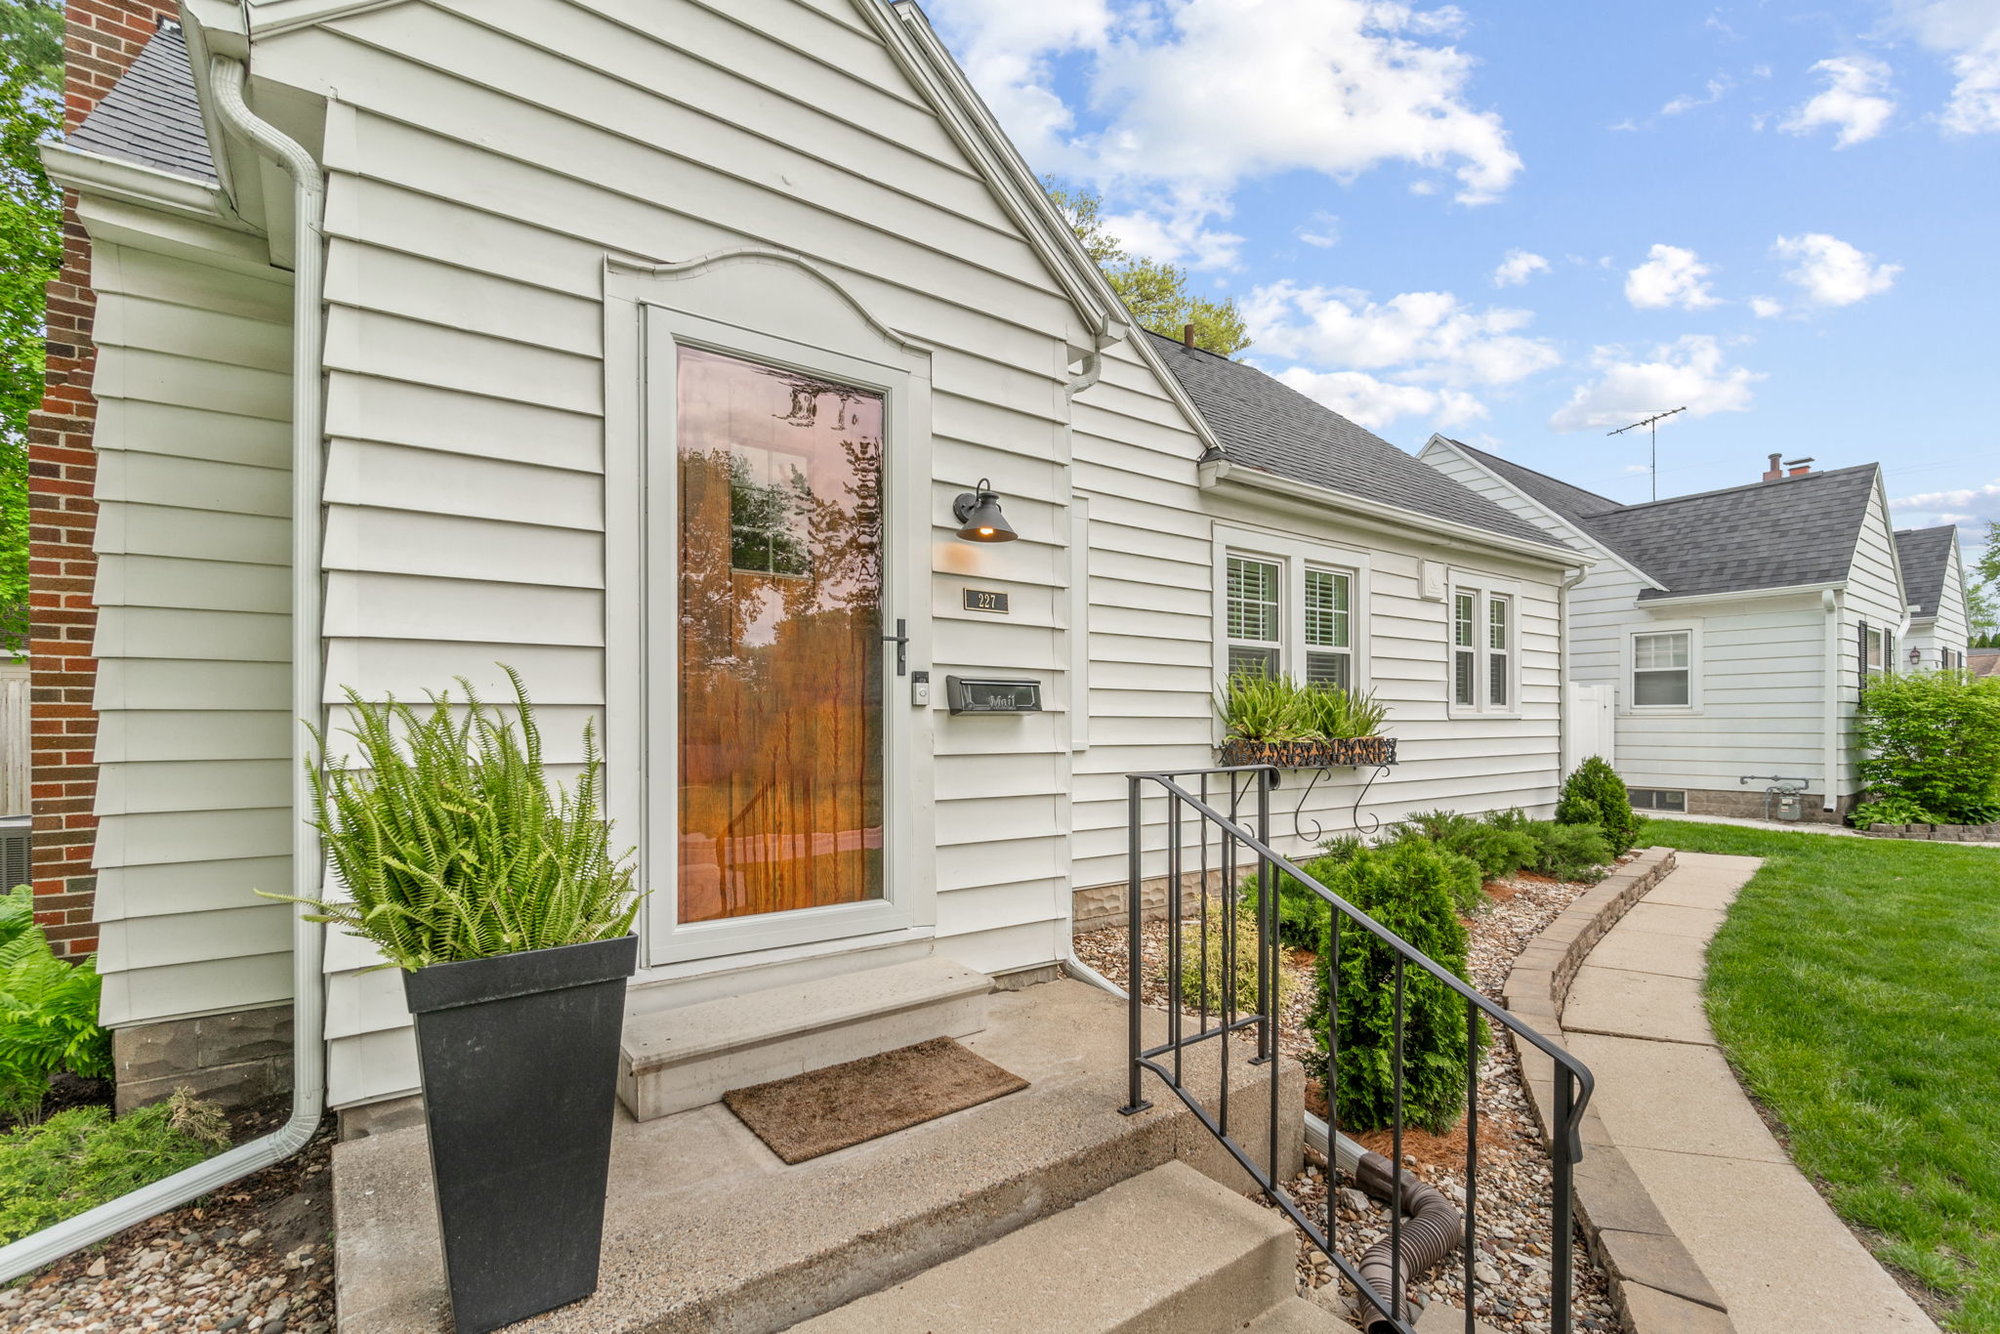 May Listing of the Month: The Breathtaking Bungalow in Waterloo Iowa